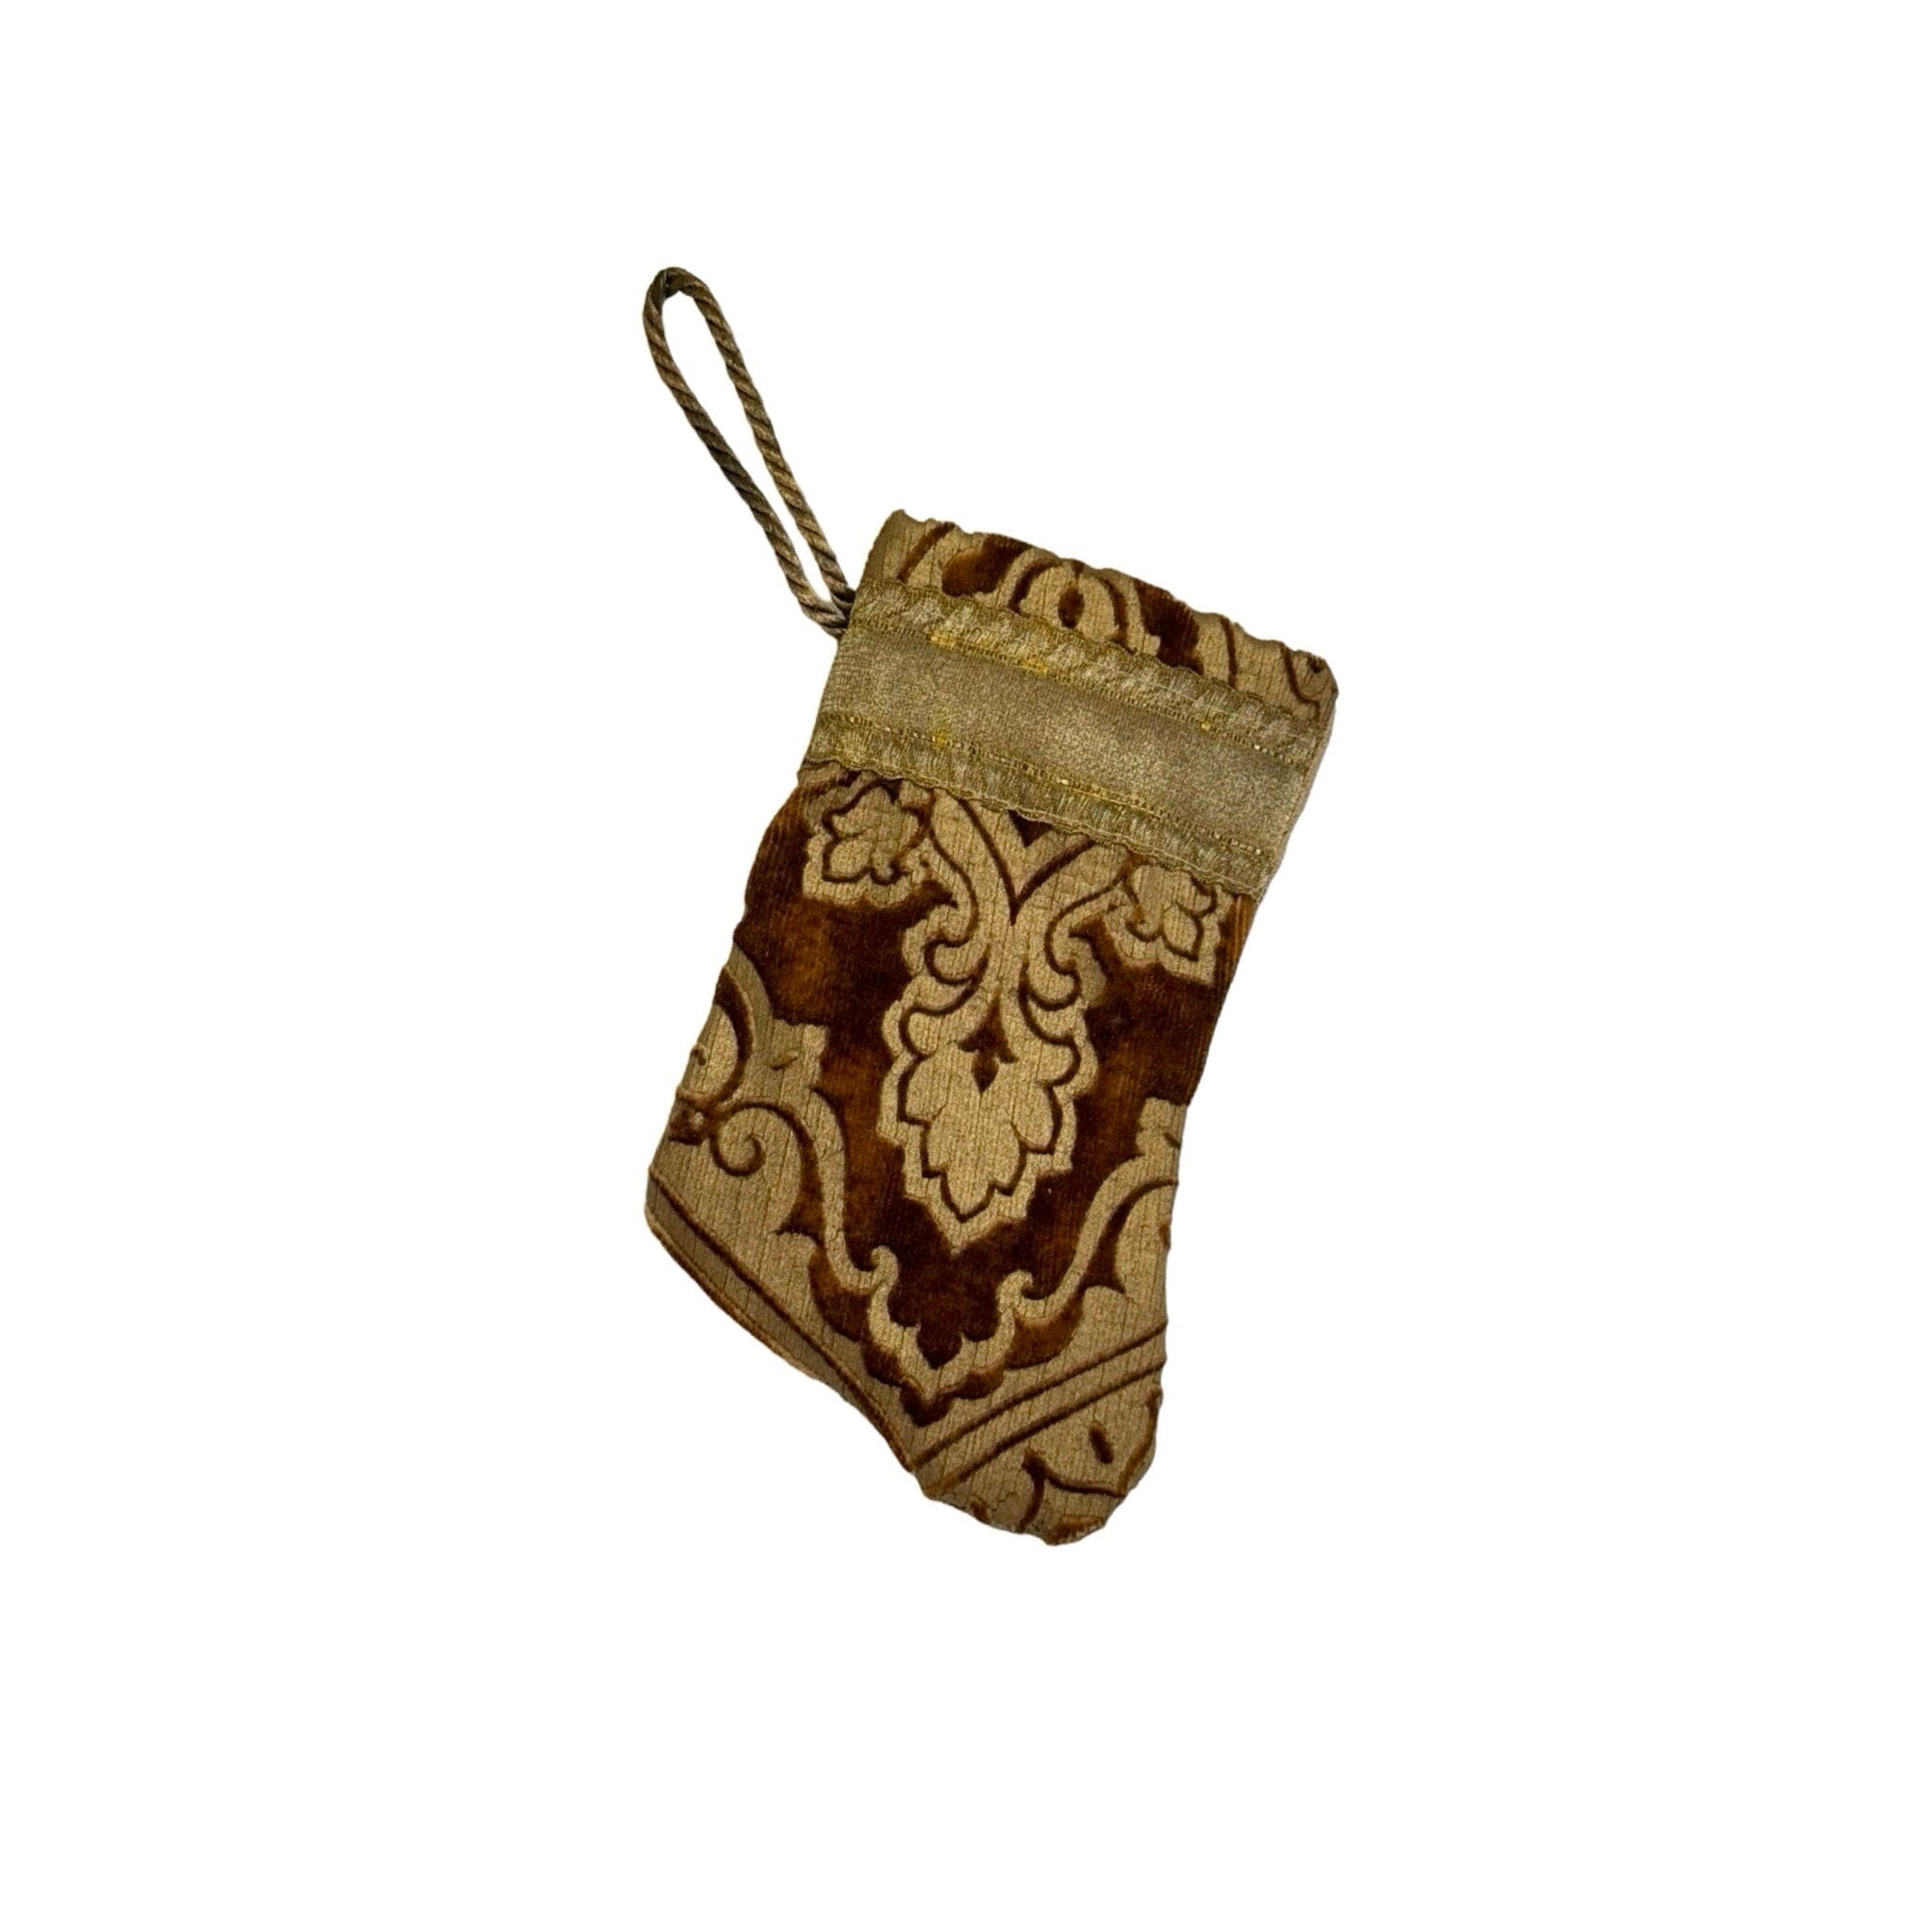 Handmade Mini Stocking Made From Vintage Fabric and Trims- Brown and Gold Ornament B. Viz Design A 